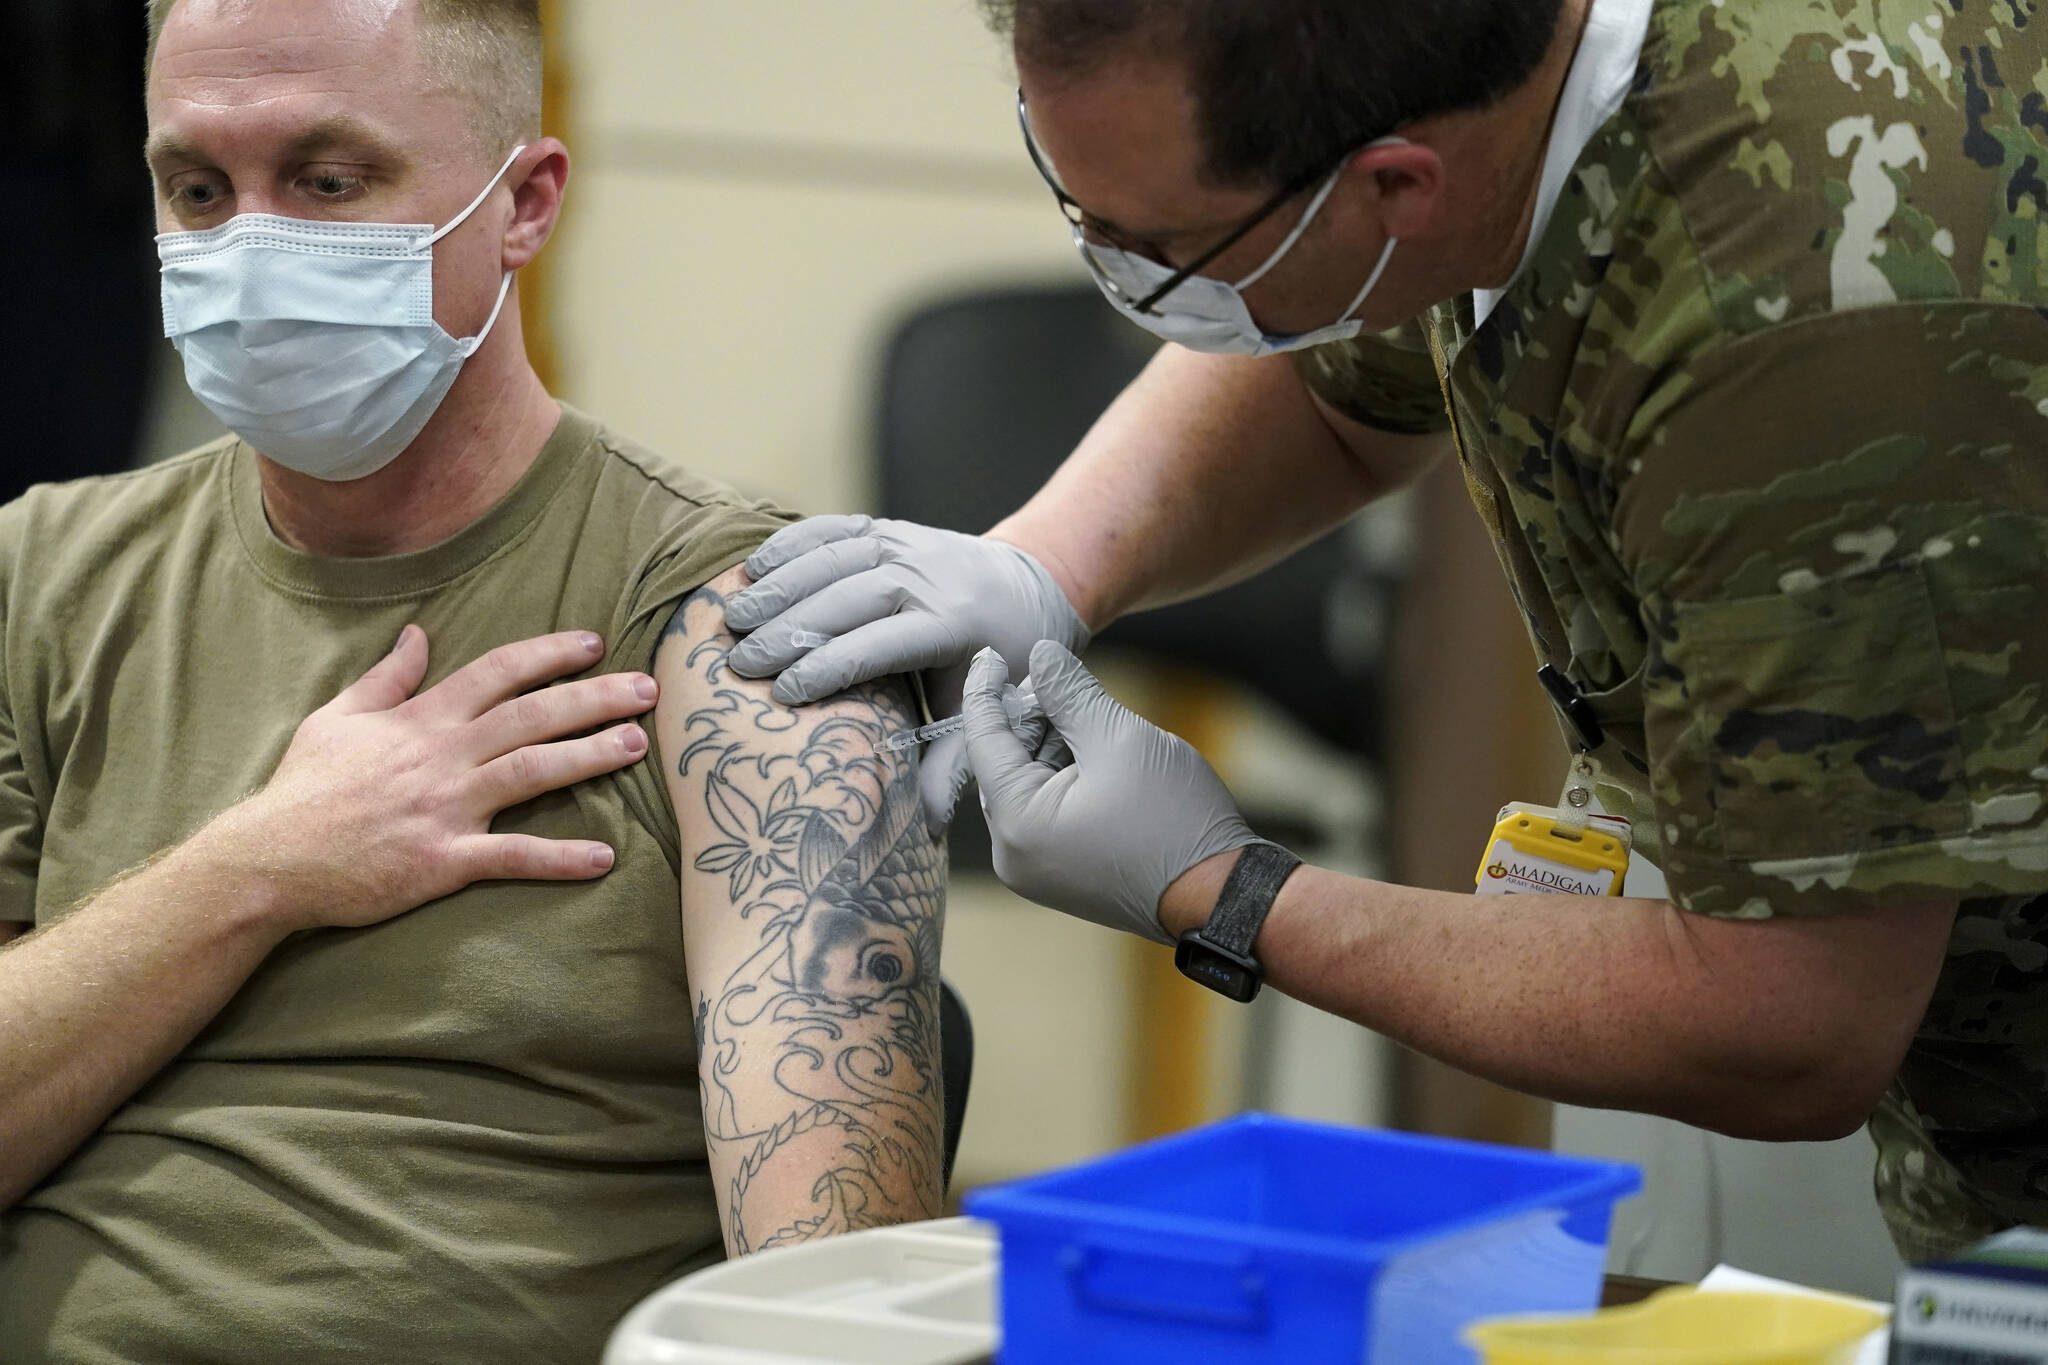 Staff Sgt. Travis Snyder, left, receives the first dose of the Pfizer COVID-19 vaccine given at Madigan Army Medical Center at Joint Base Lewis-McChord in Washington state, Dec. 16, 2020, south of Seattle. U.S. military forces around the world will no longer be required to get the COVID-19 vaccine. The mandate was lifted under an $858 billion defense spending bill passed by Congress and signed into law Friday by President Joe Biden. (AP Photo / Ted S. Warren)